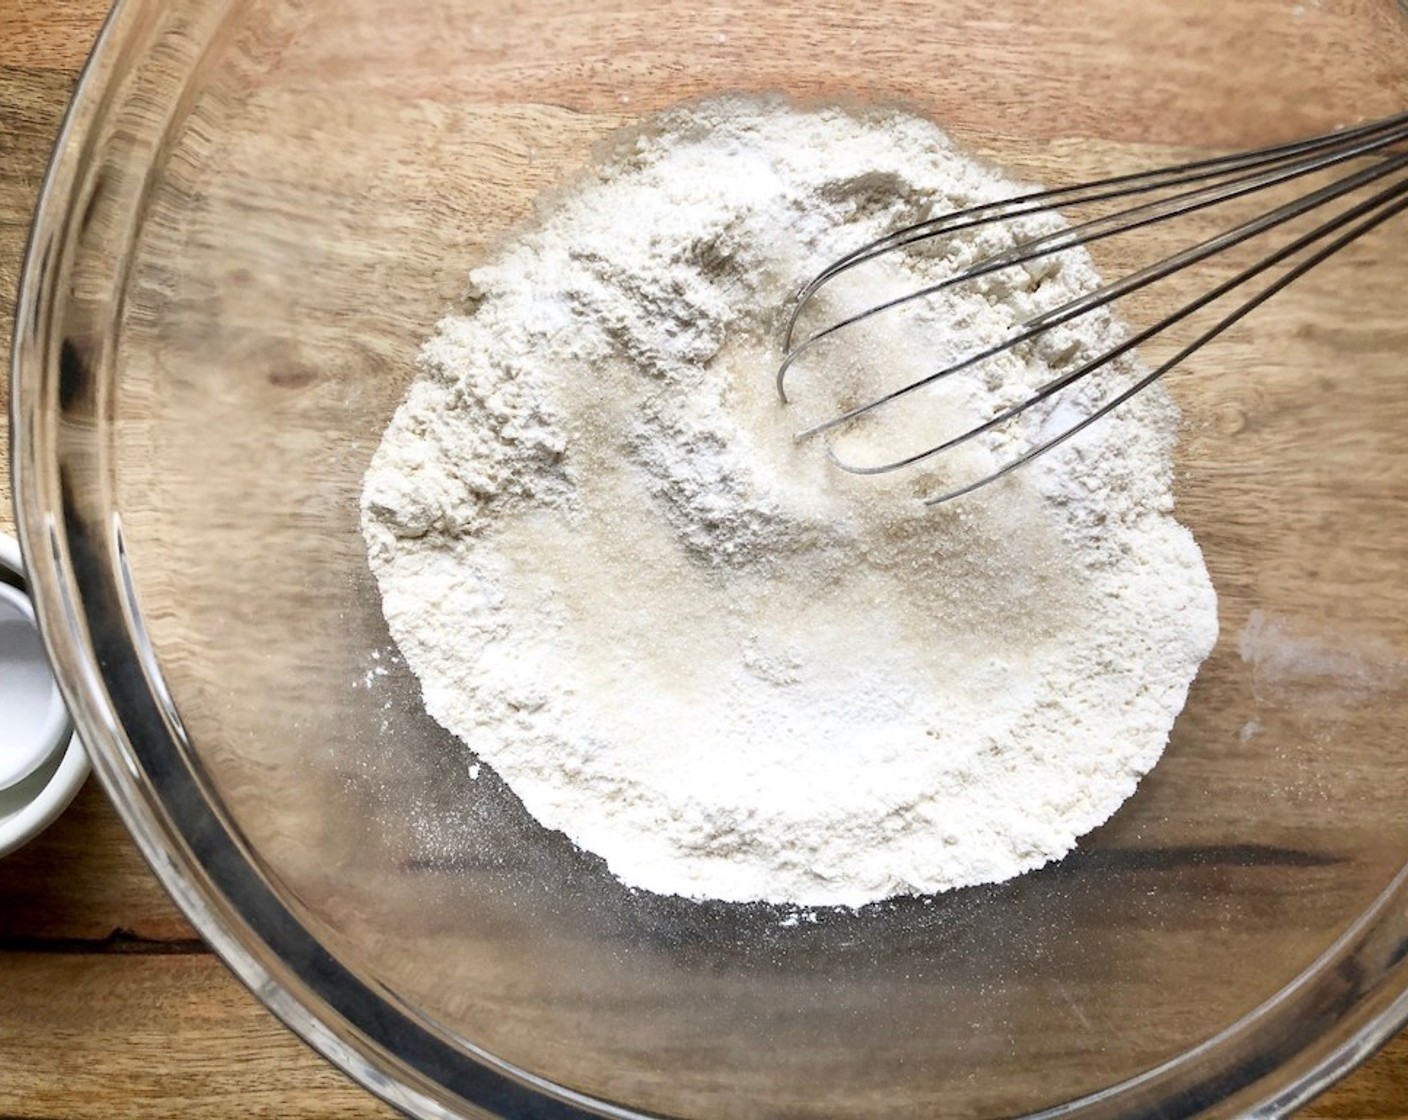 step 3 To make the Pancake Batter, whisk together the All-Purpose Flour (1 3/4 cups), Baking Soda (3/4 tsp), Baking Powder (1 tsp), Granulated Sugar (1 1/2 Tbsp), and Salt (1/2 tsp) in a large bowl.